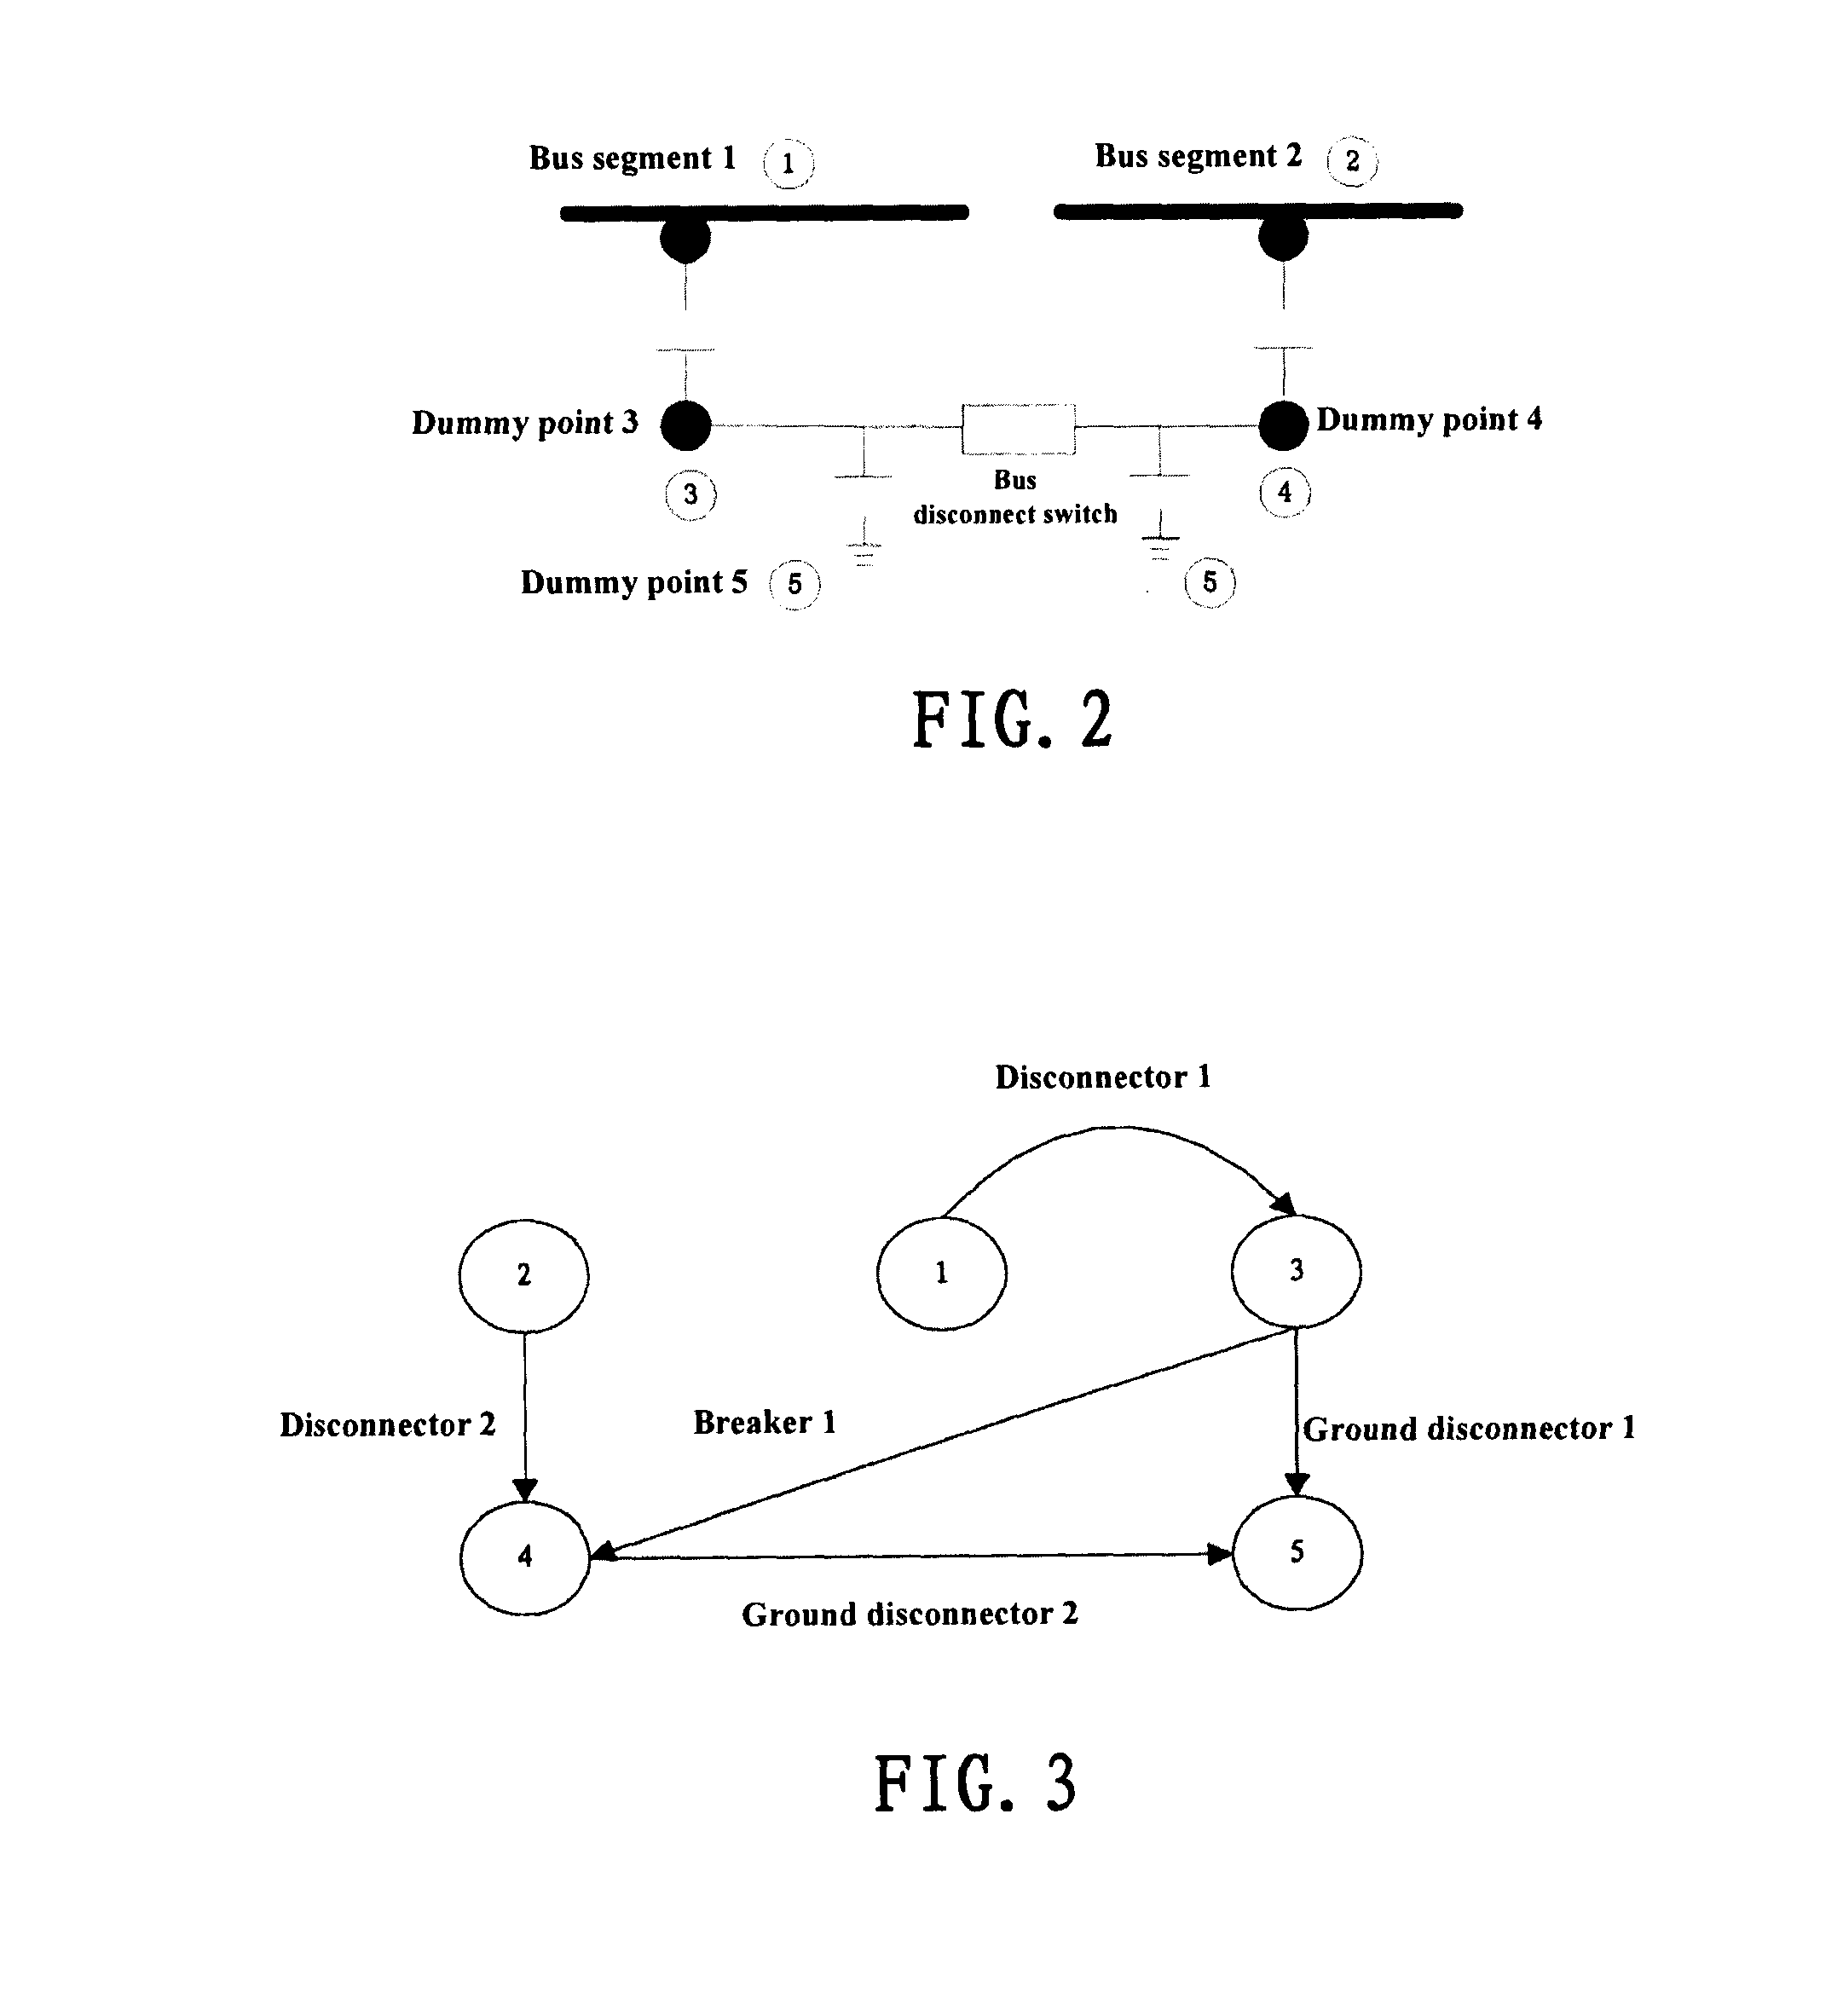 Method and device for extracting skeleton topology structure of electric power grid